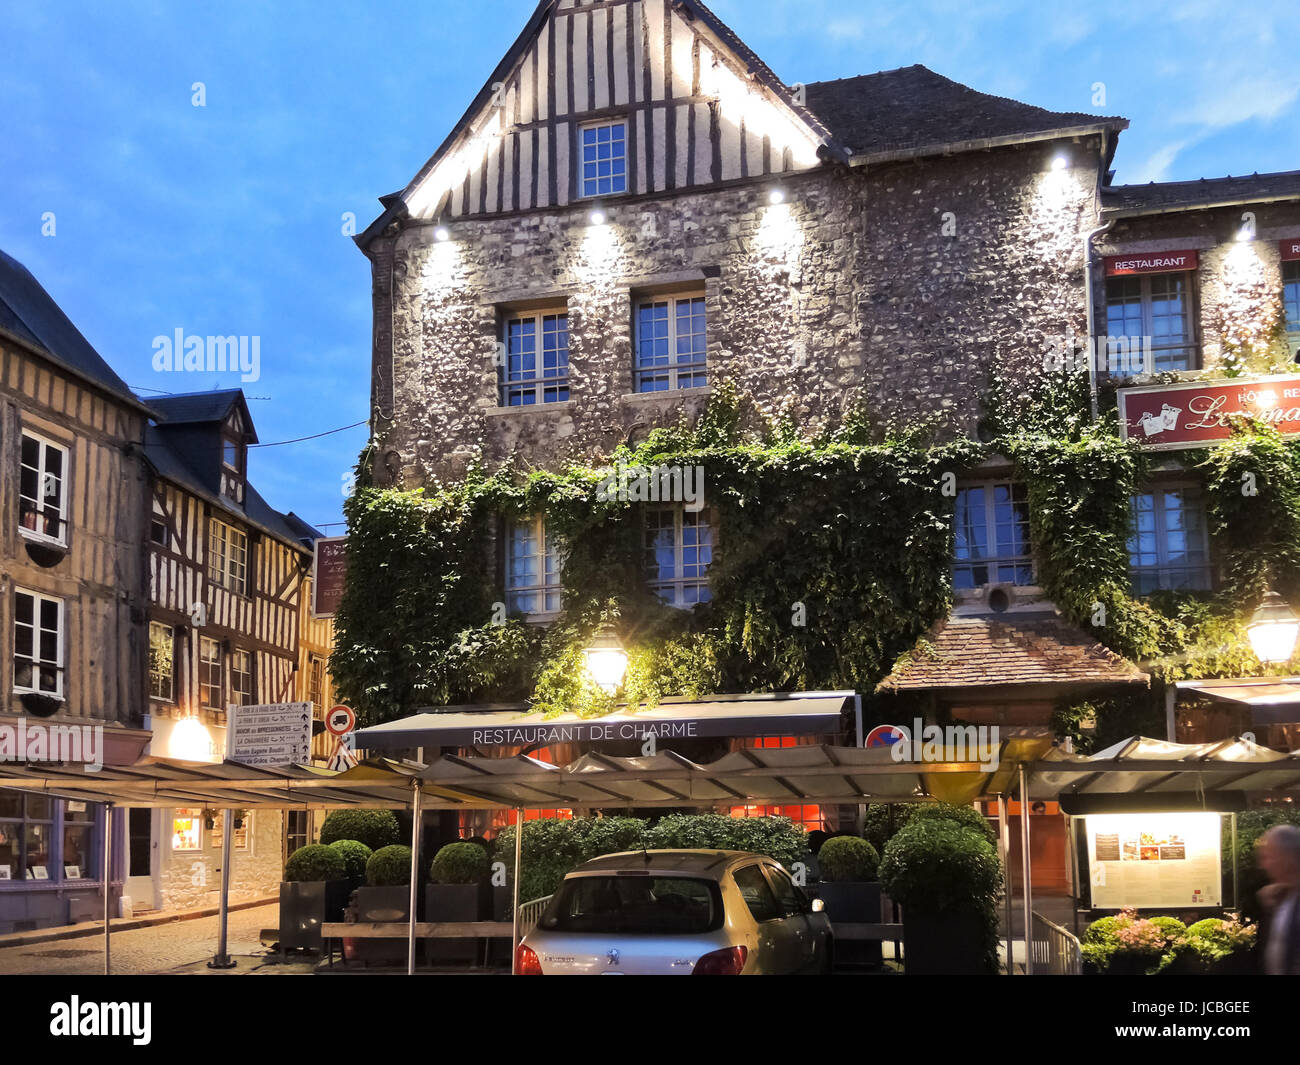 HONFLEUR, FRANCE - AUGUST 4, 2014: historical edifice Les maisons de Lea in Honfleur town, France. It is made up of an old salt warehouse and three 16thC houses, and sits in the Place Sainte Catherine Stock Photo